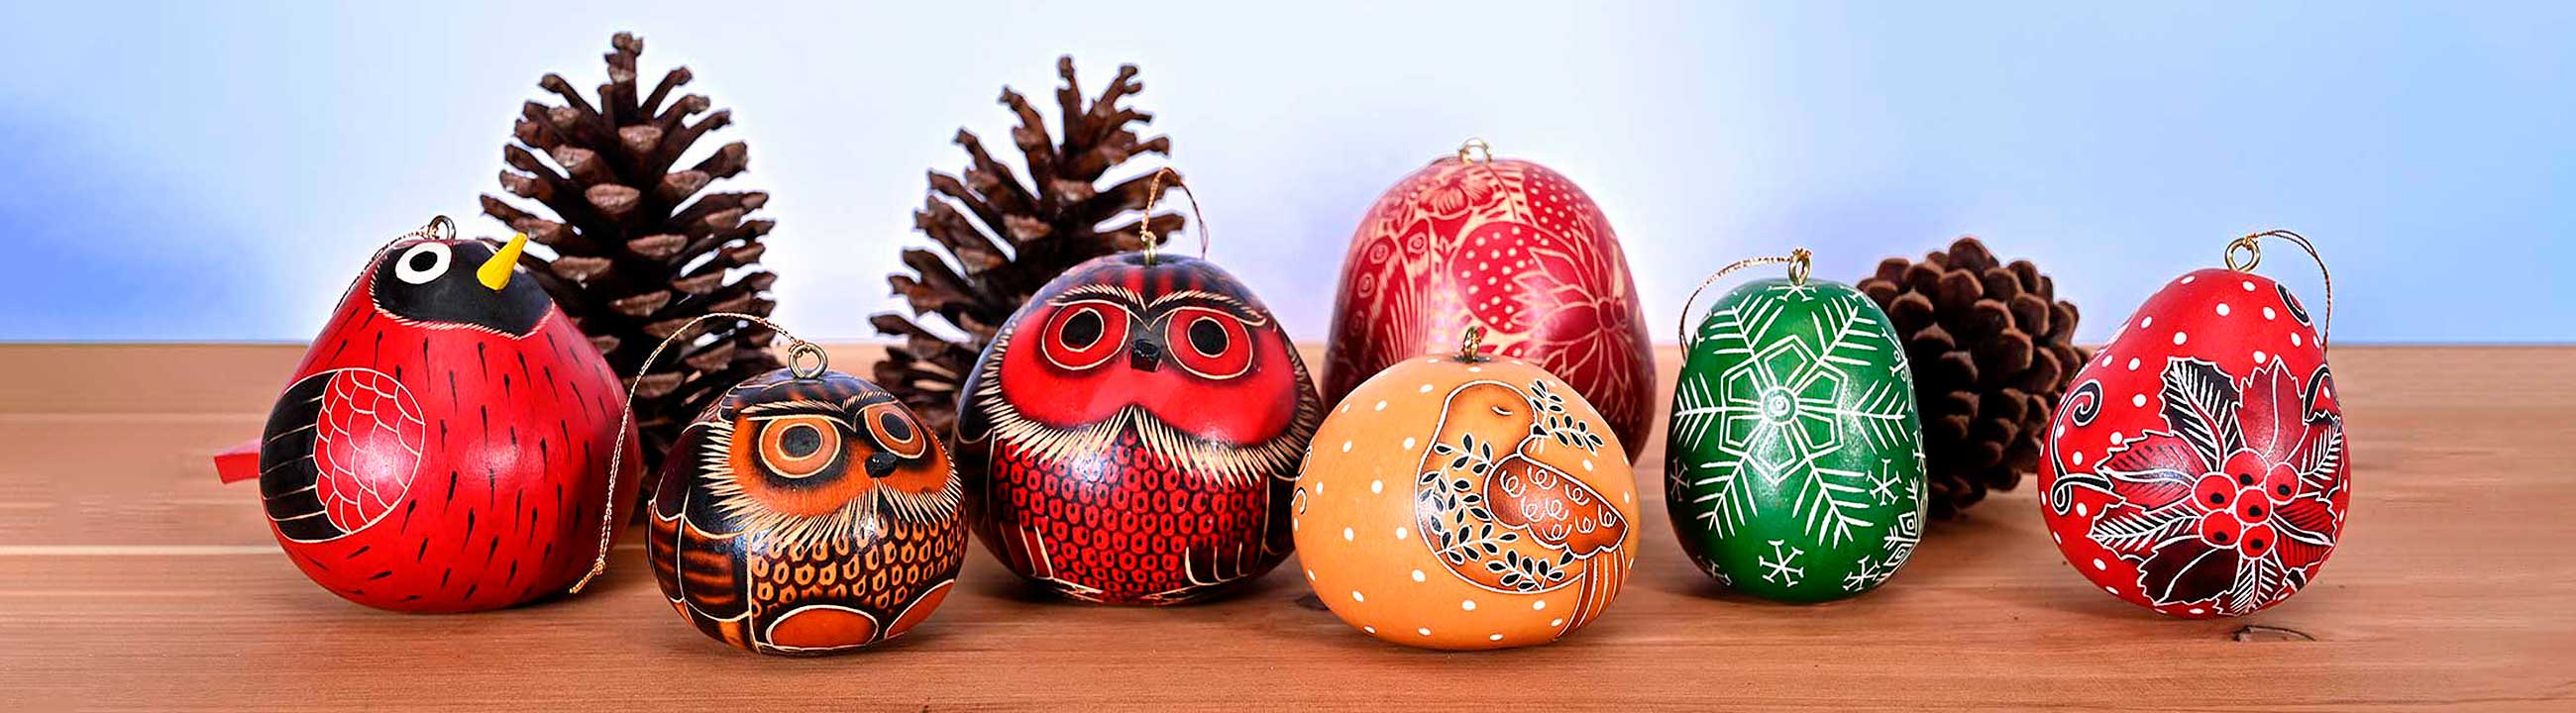 ornaments for all seasons